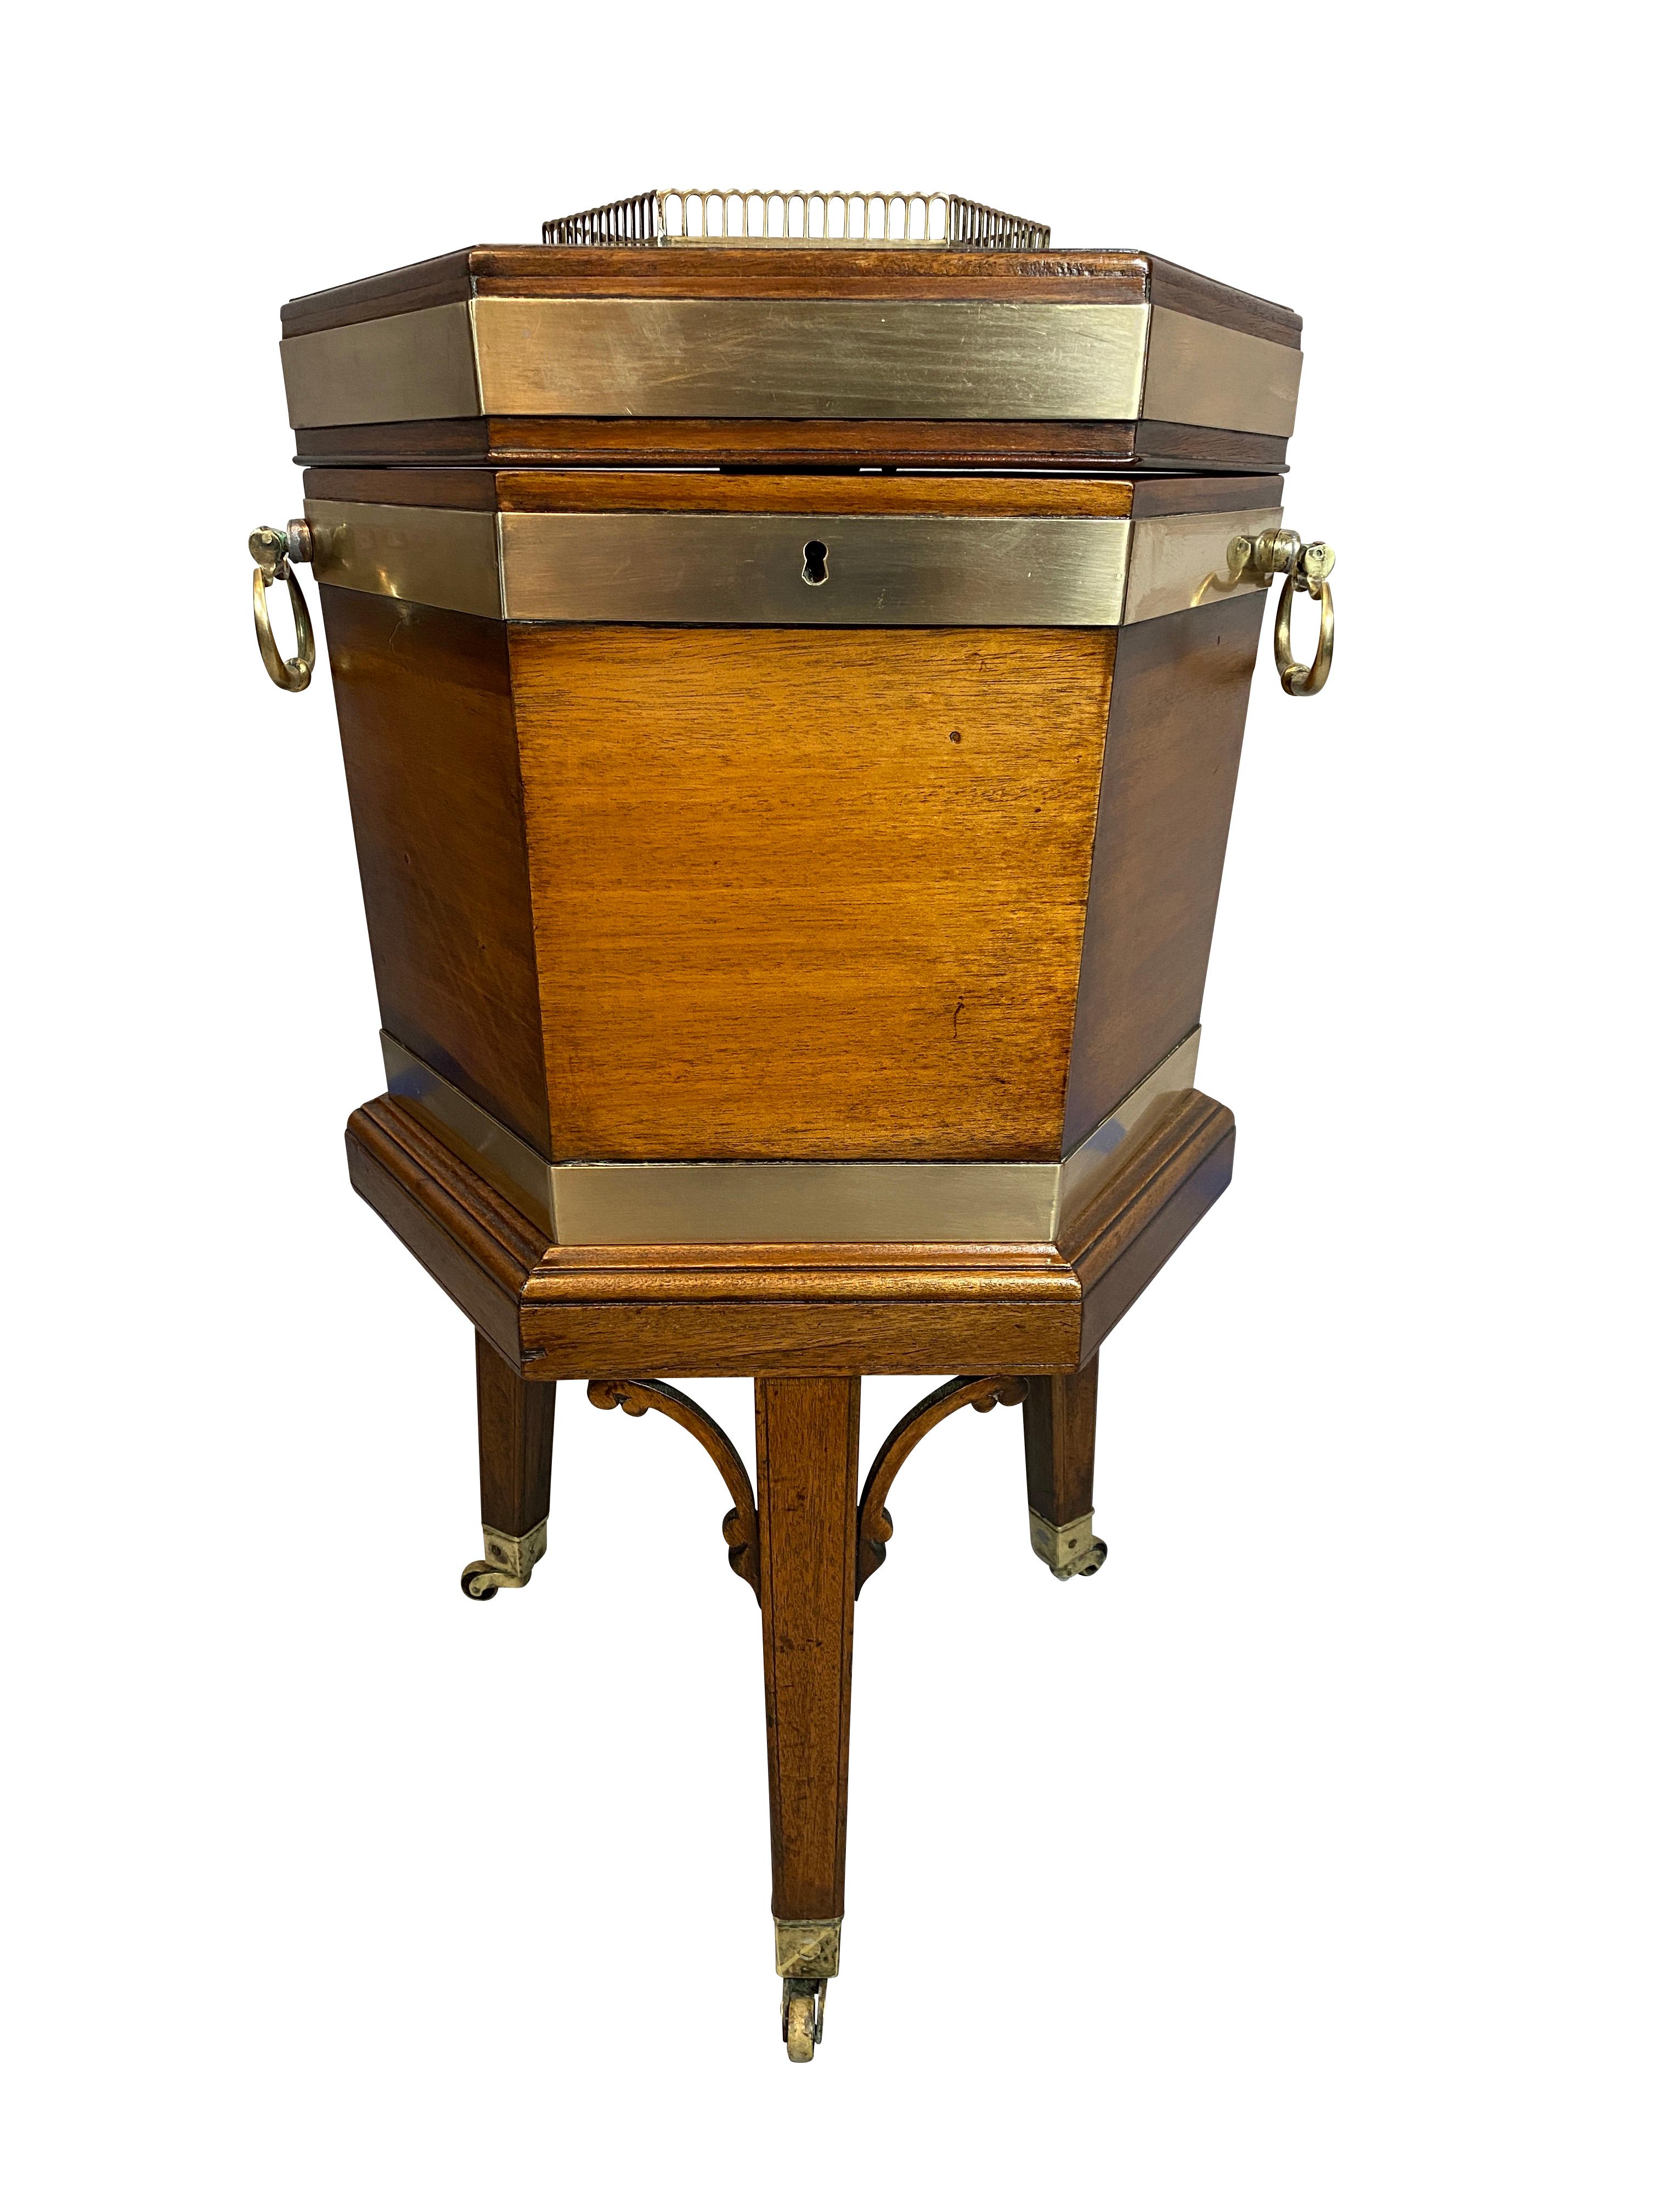 Hexagonal hinged lid with brass gallery over a conforming case, the interior fitted for bottles, sides with brass strapping and carry handles, raised on square tapered legs with spandrels and ending on casters.